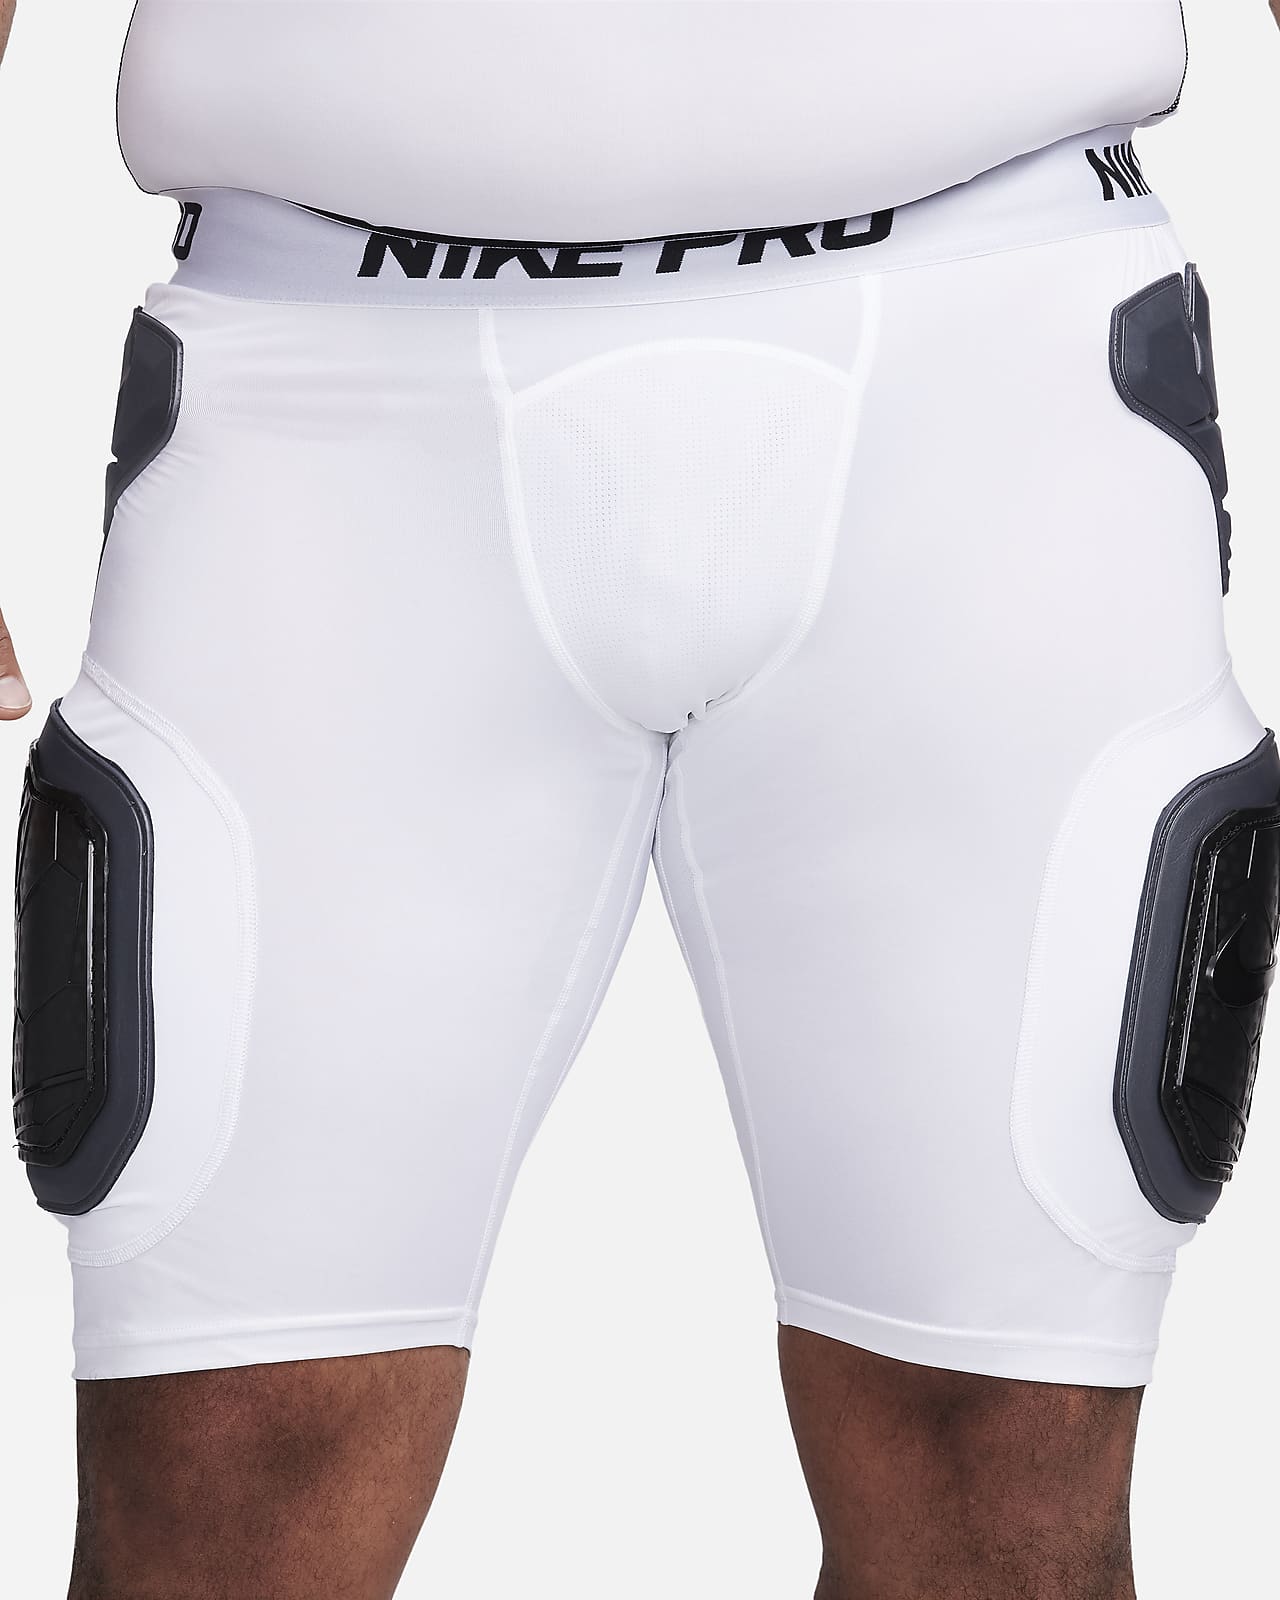 Nike Pro Combat Hyperstrong Compression Shorts  Nike pro combat,  Compression shorts, Padded compression shorts